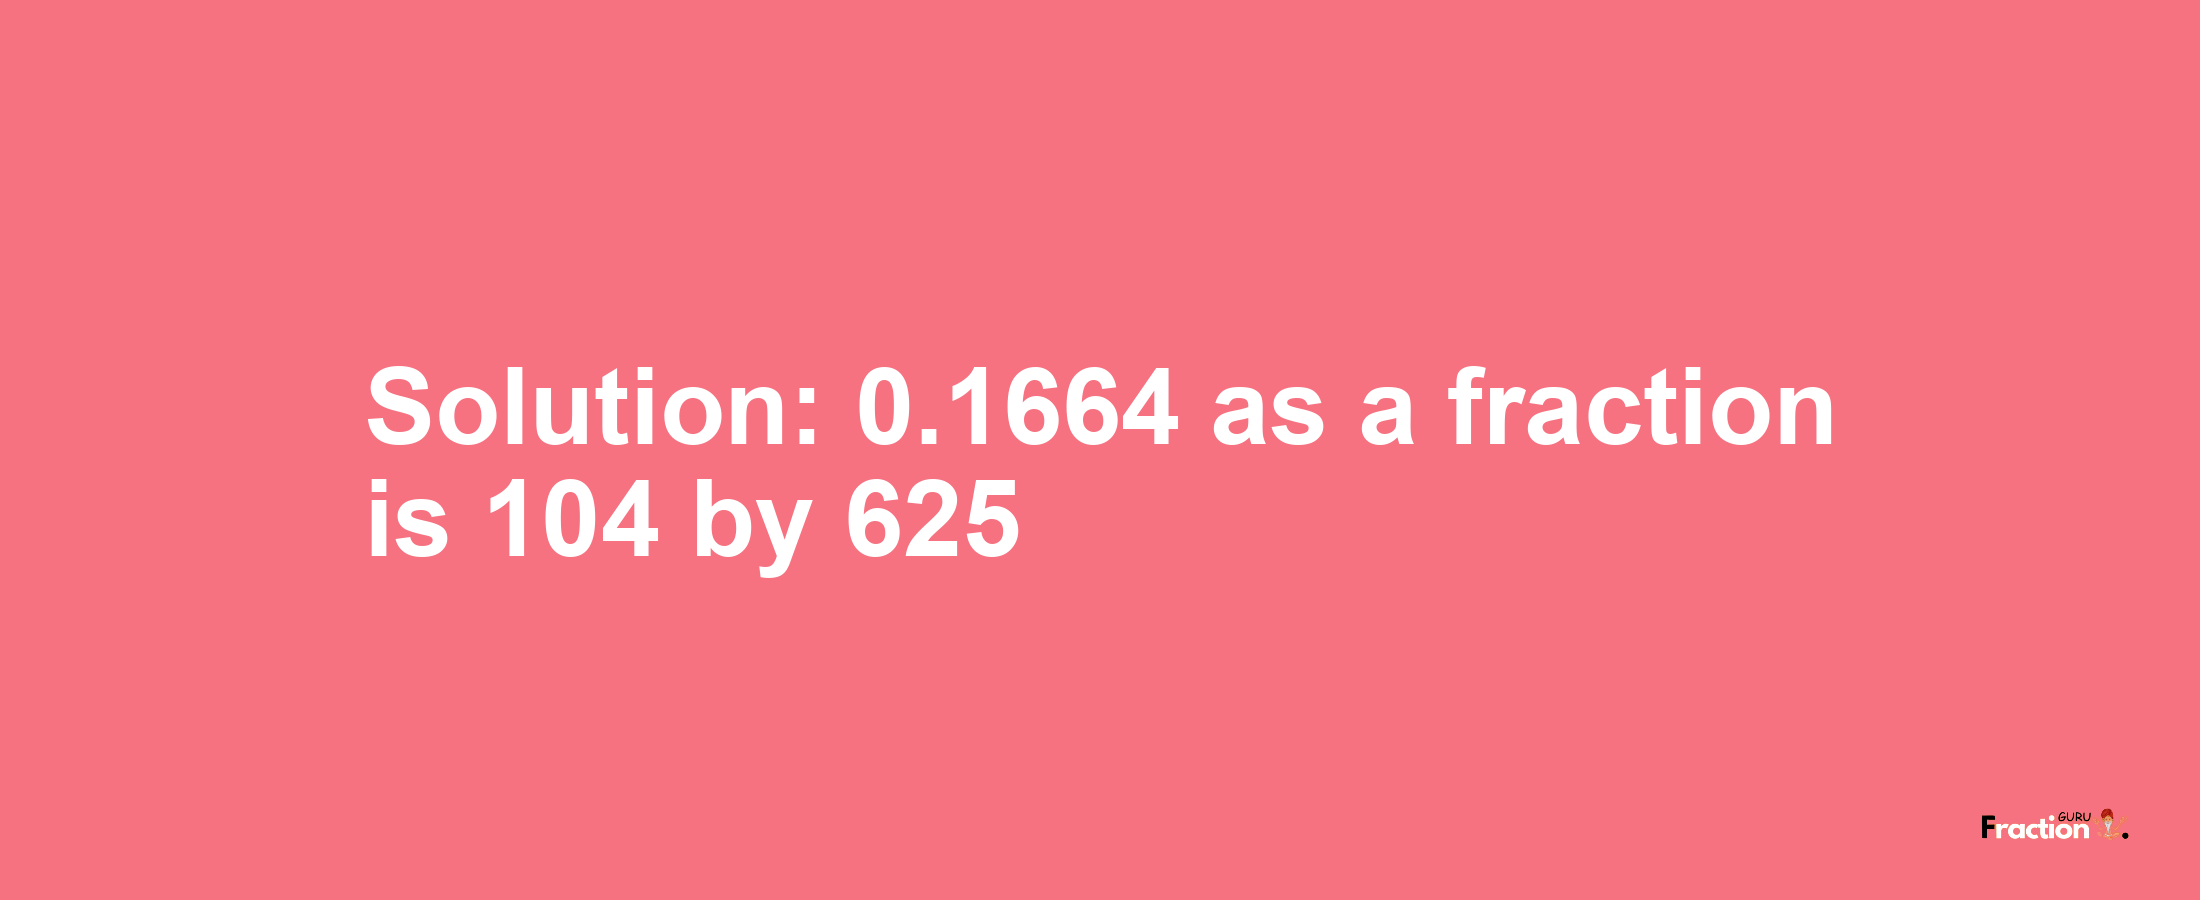 Solution:0.1664 as a fraction is 104/625